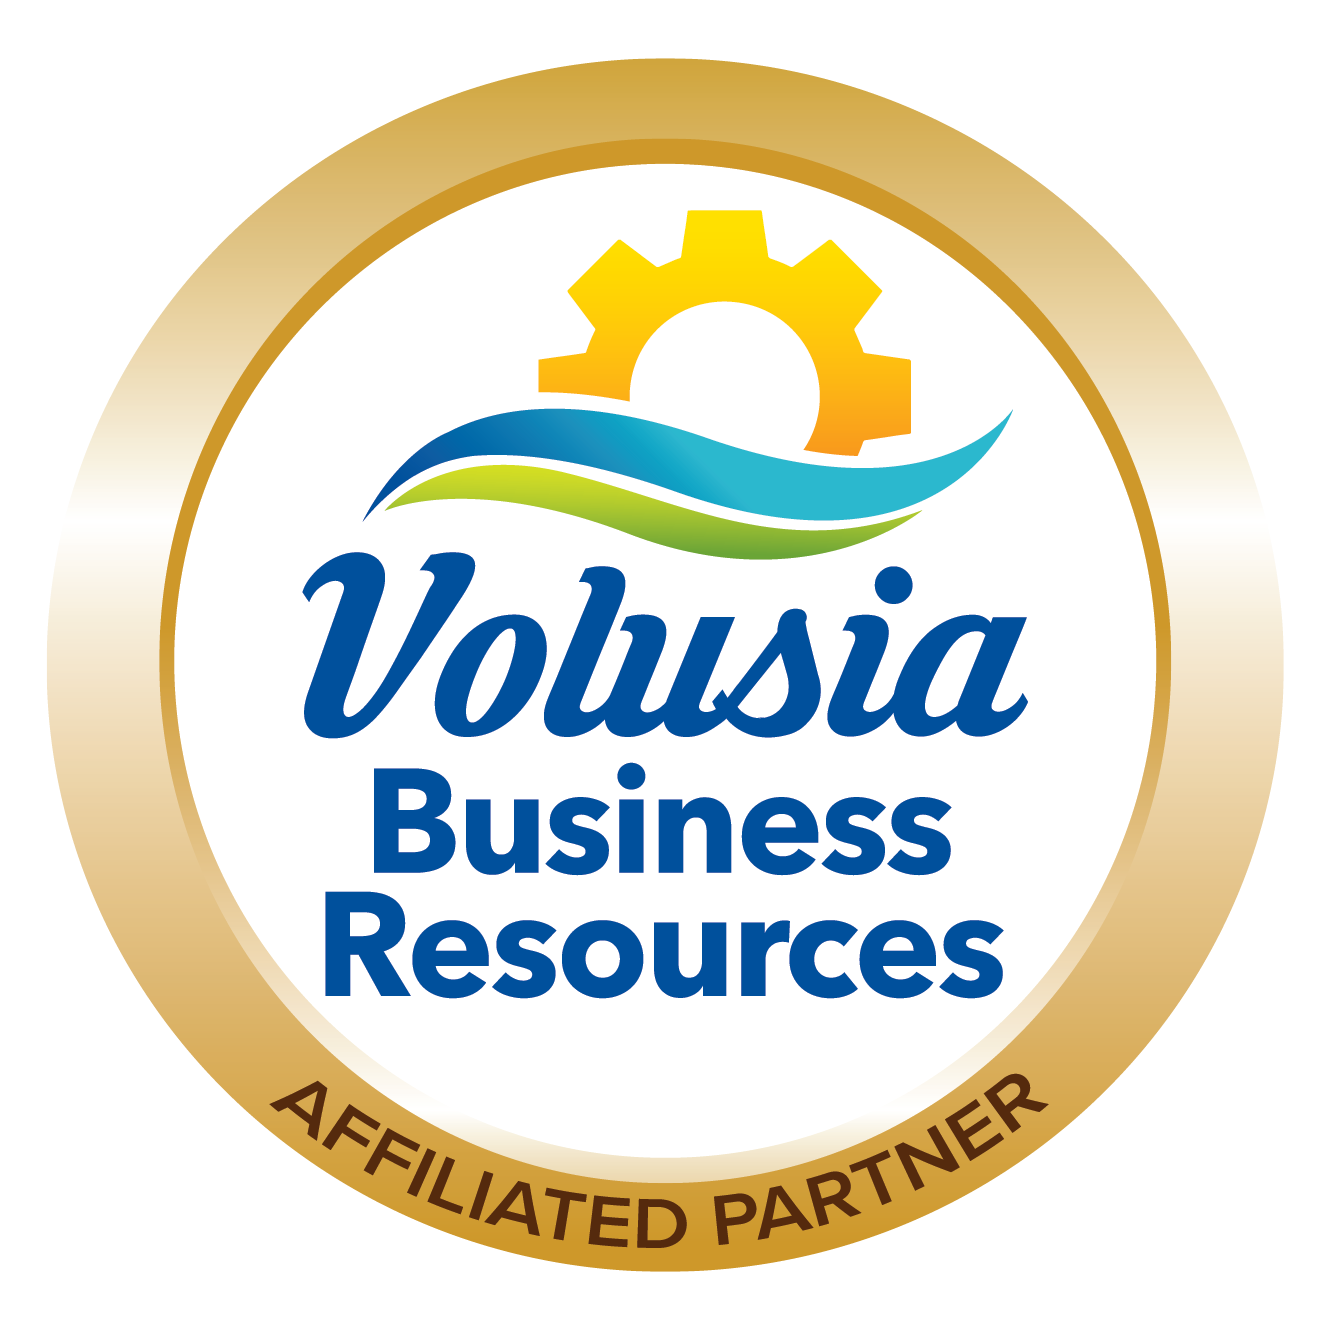 Volusia Business Resources Affiliated Partner seal with Volusia Business Resources logo in gold circle